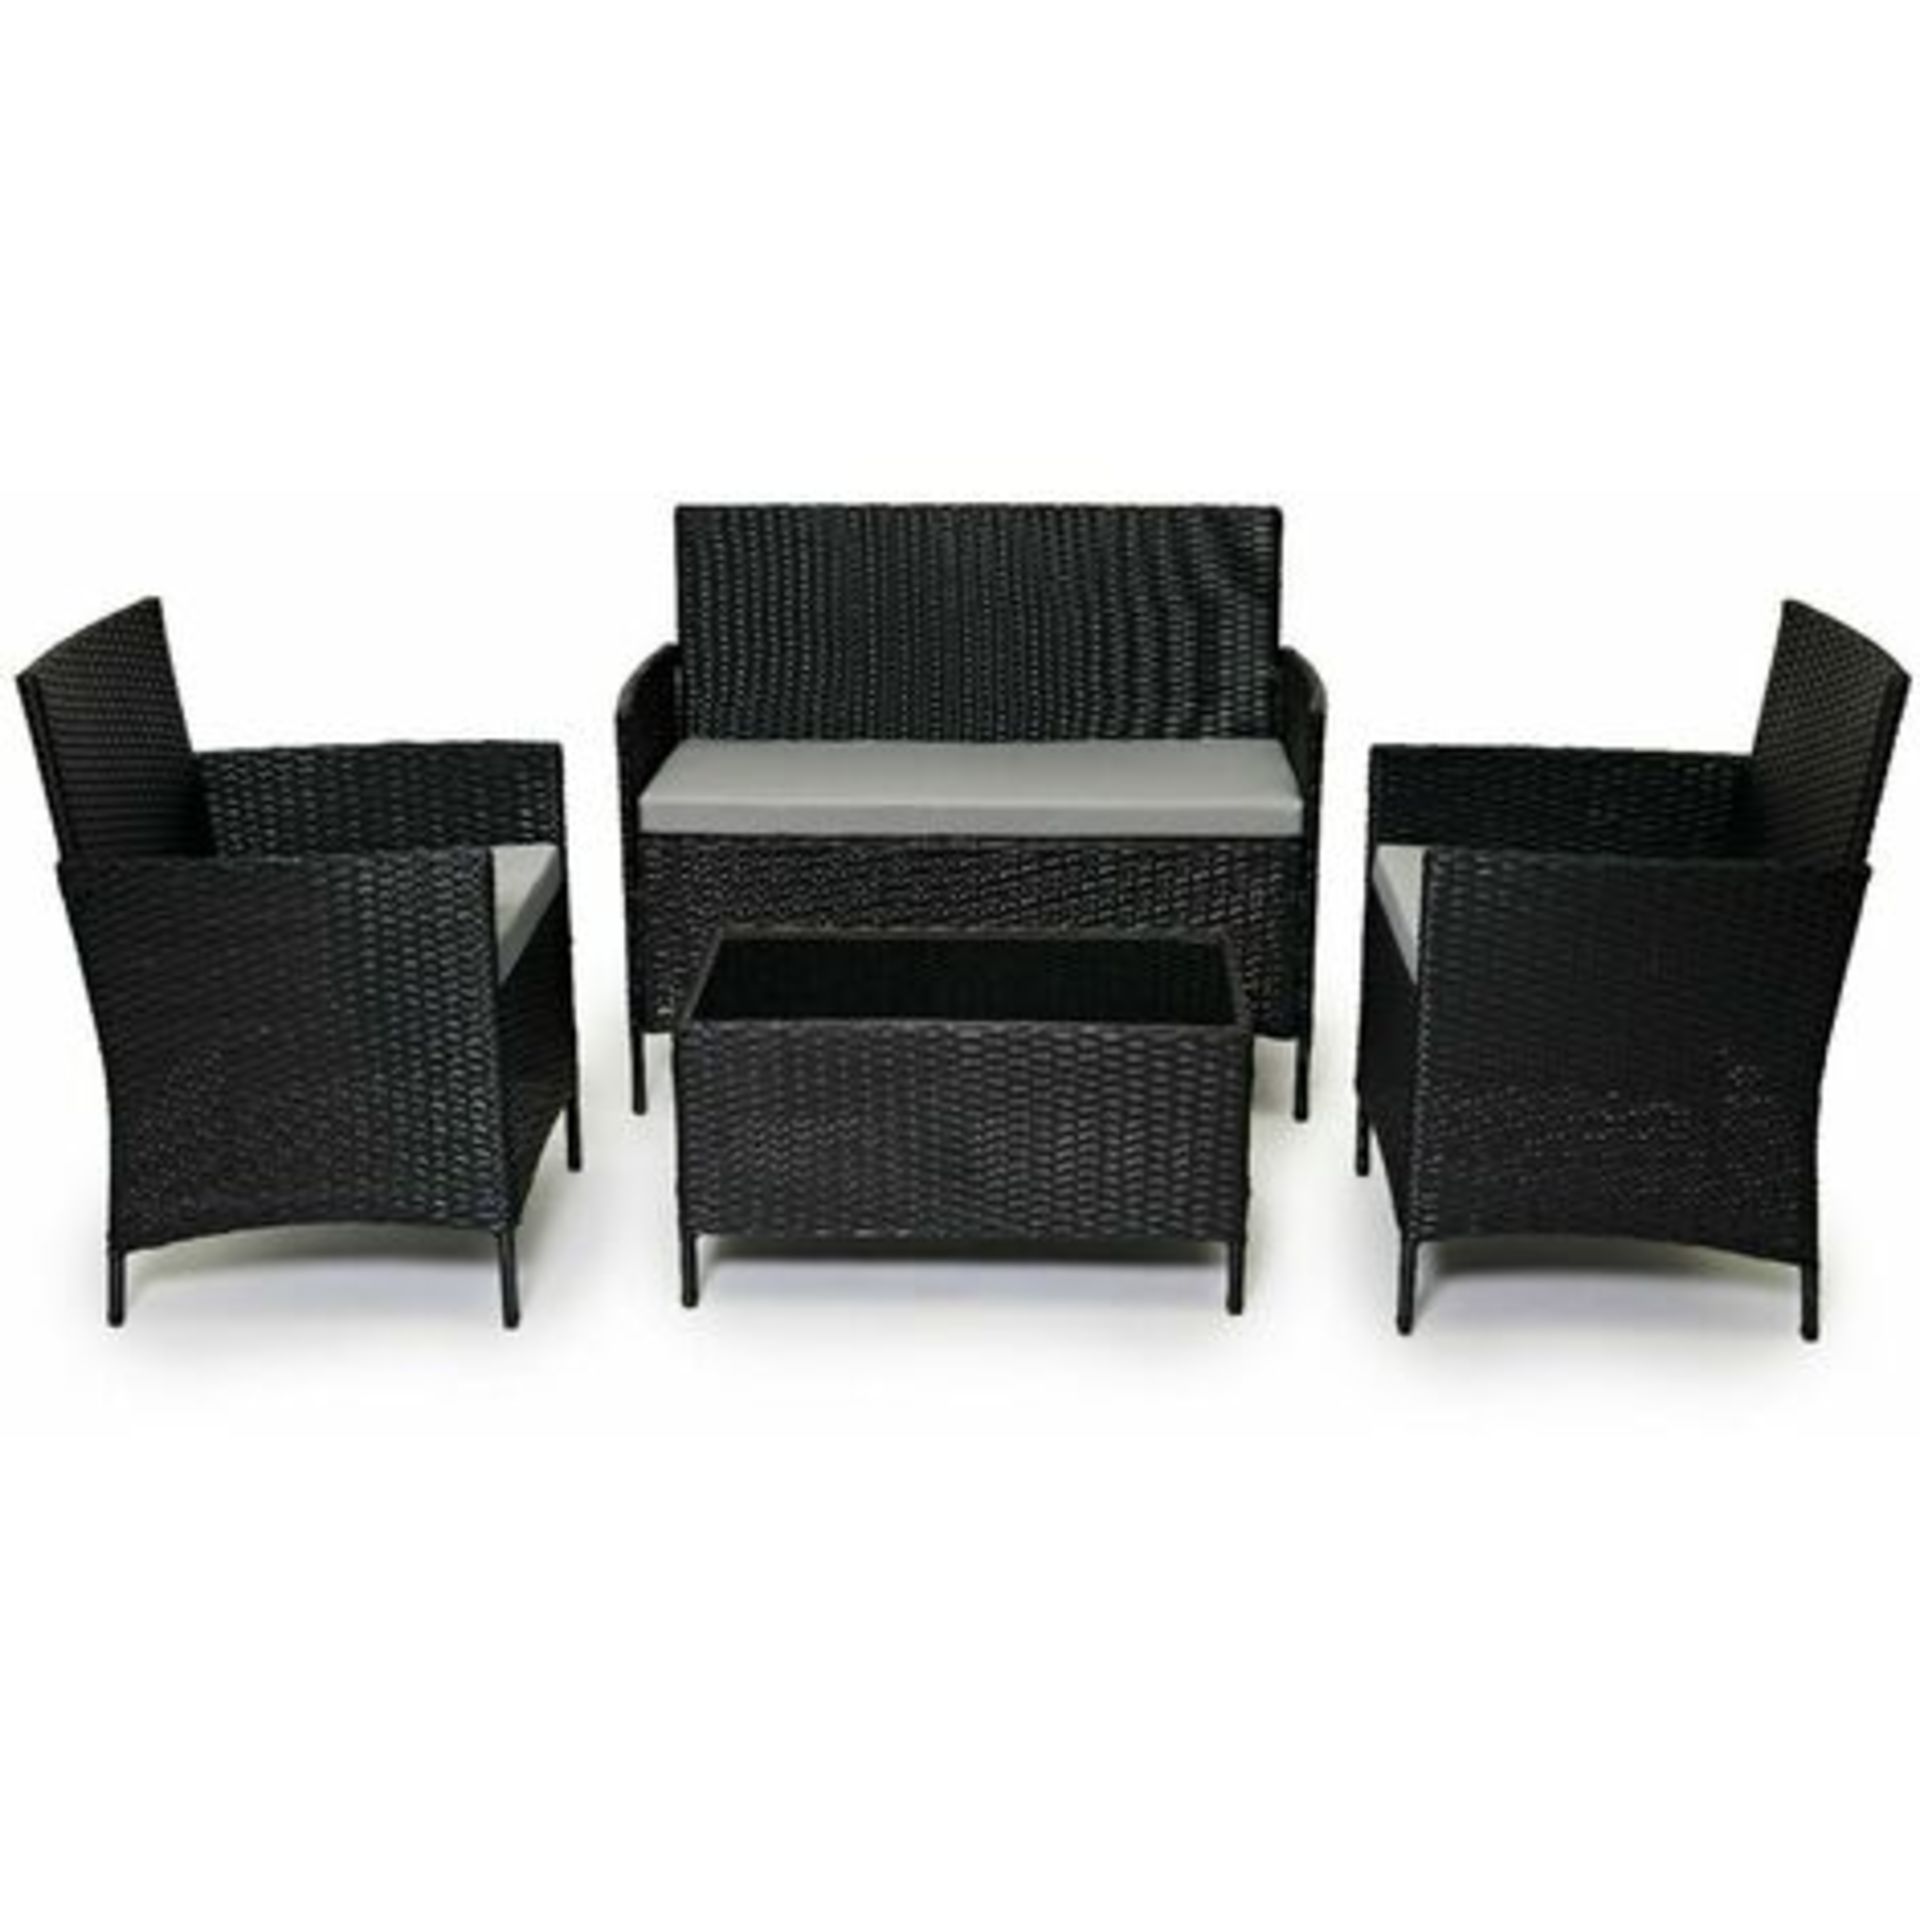 New Boxed - Luxe Jasmin 4 Piece Grey Rattan Sofa Set - Includes 2 Seater Sofa, 2 x Chairs & Table.